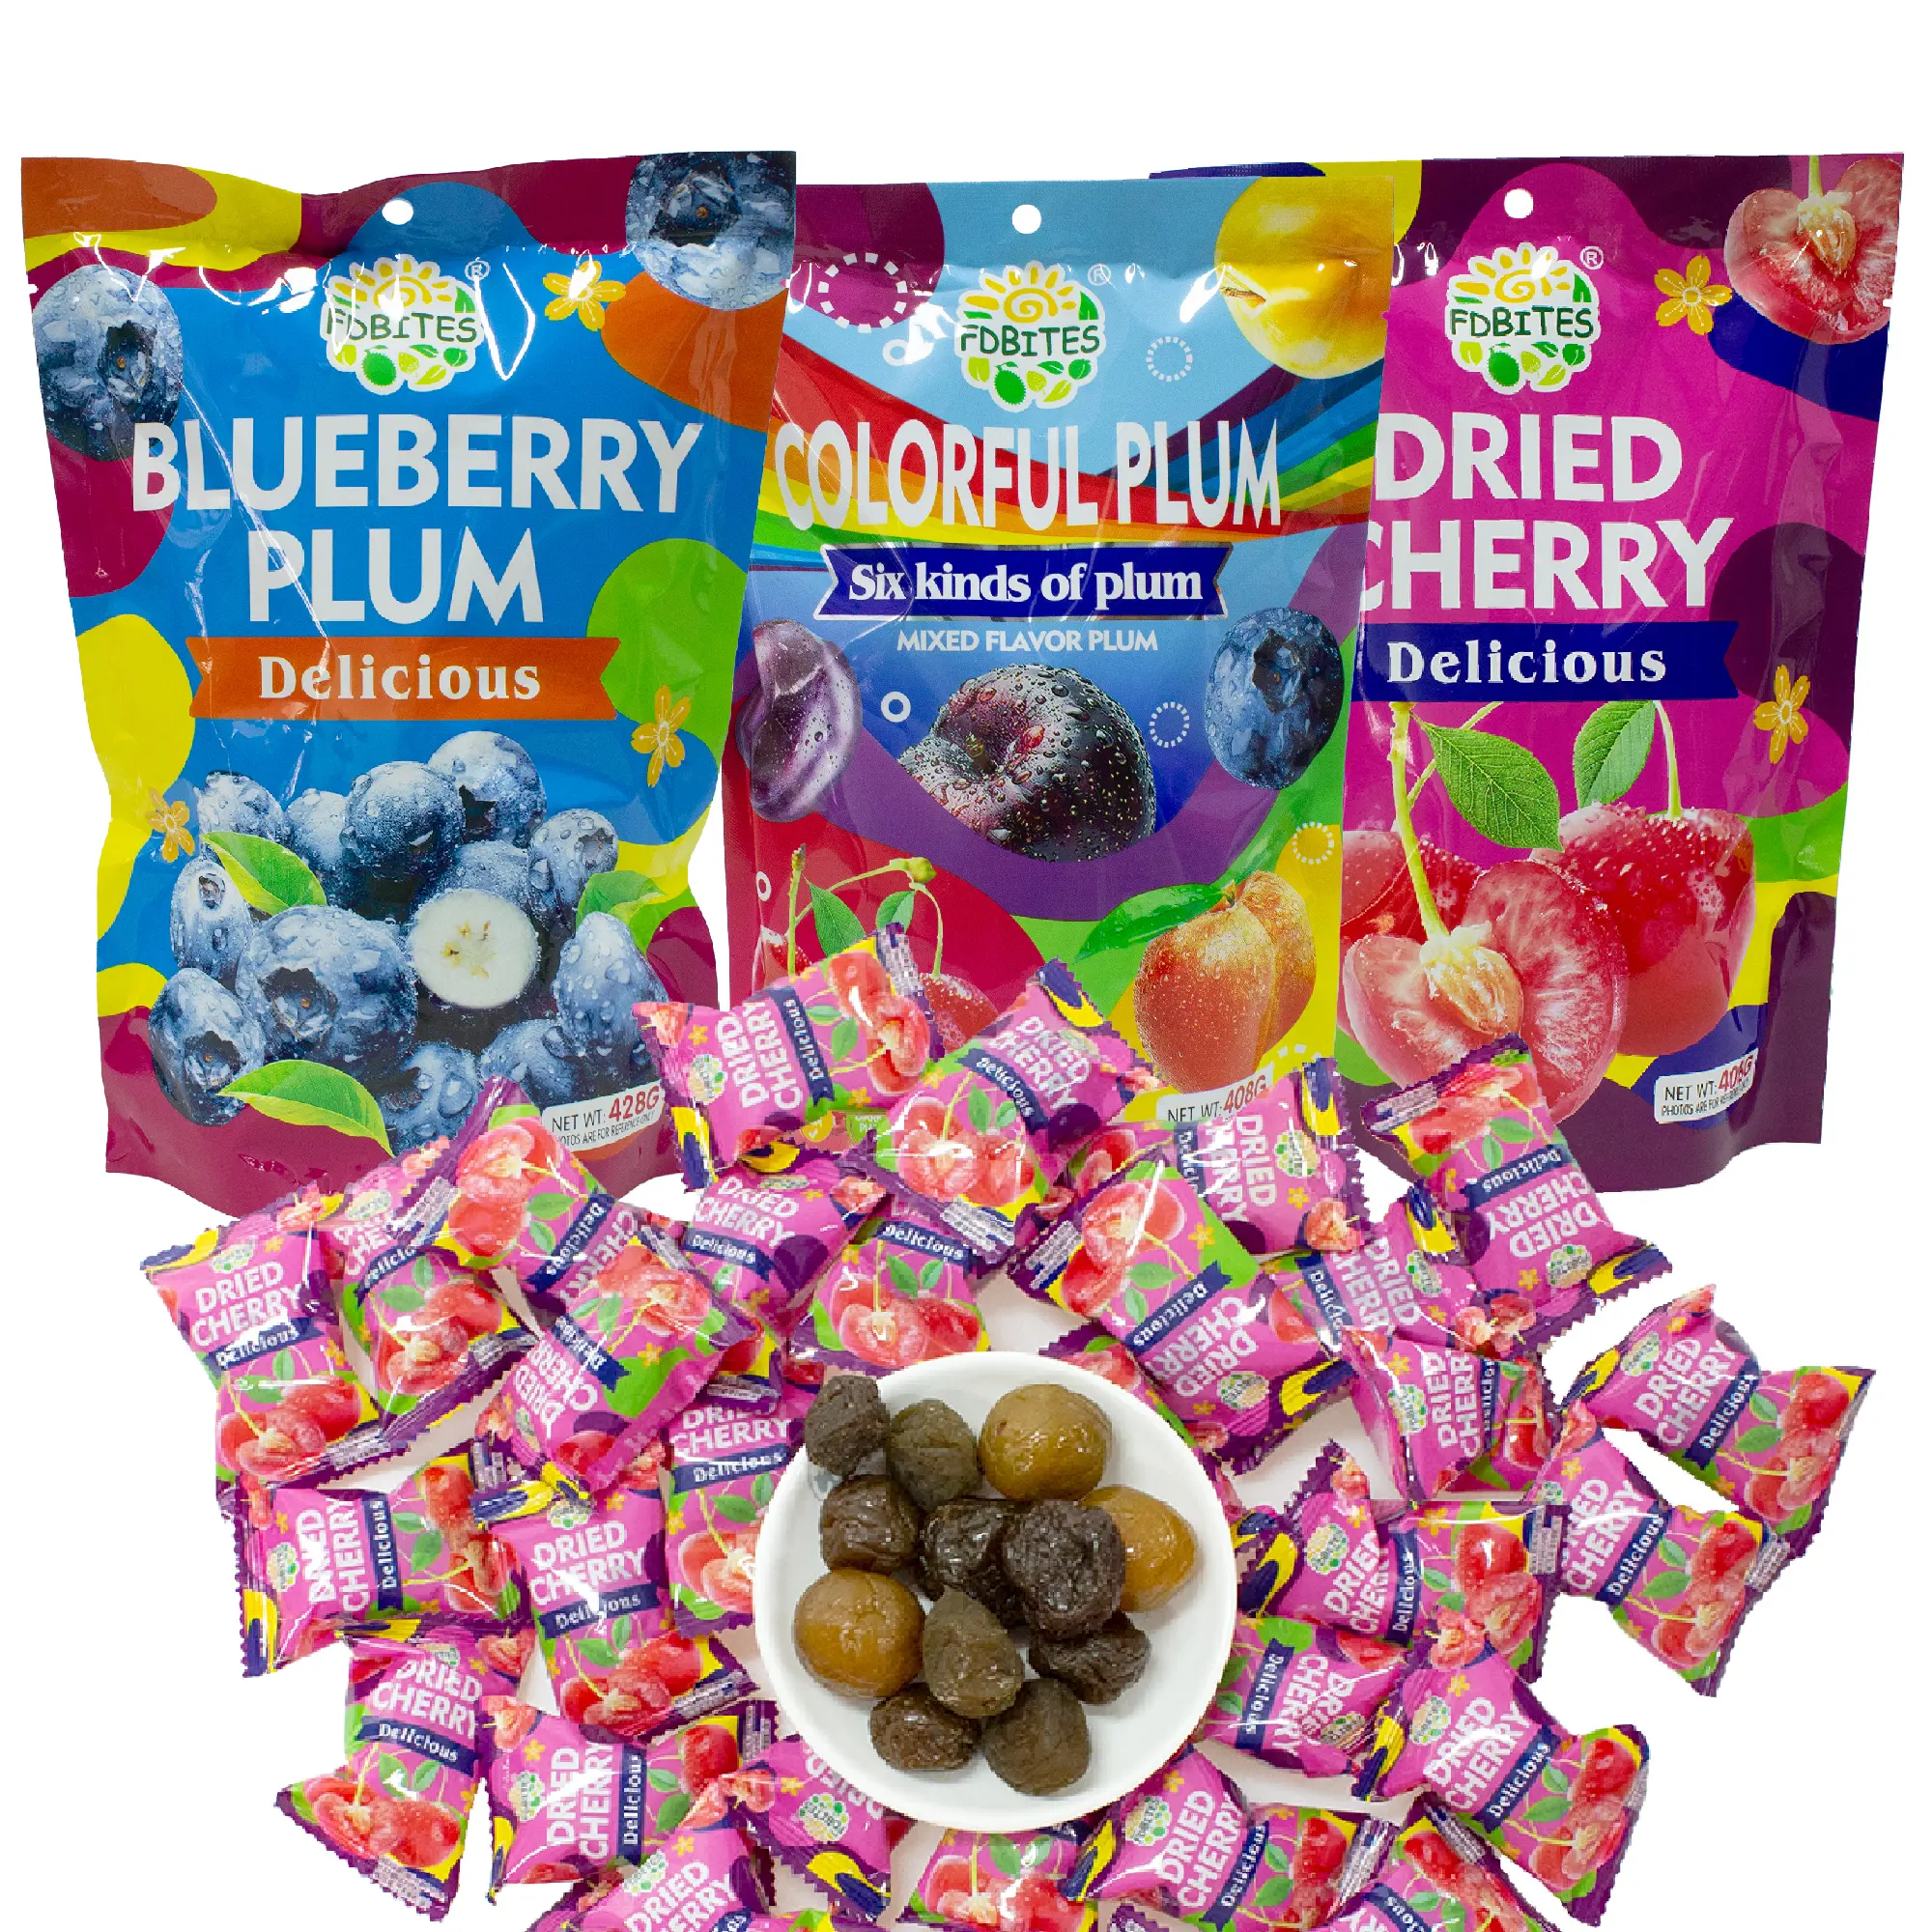 Blueberry Cherry Dry Plum Natural Clean Dried Prunes Trade Products Price Wholesale Supplier Prunes Dried Fruit For Sale